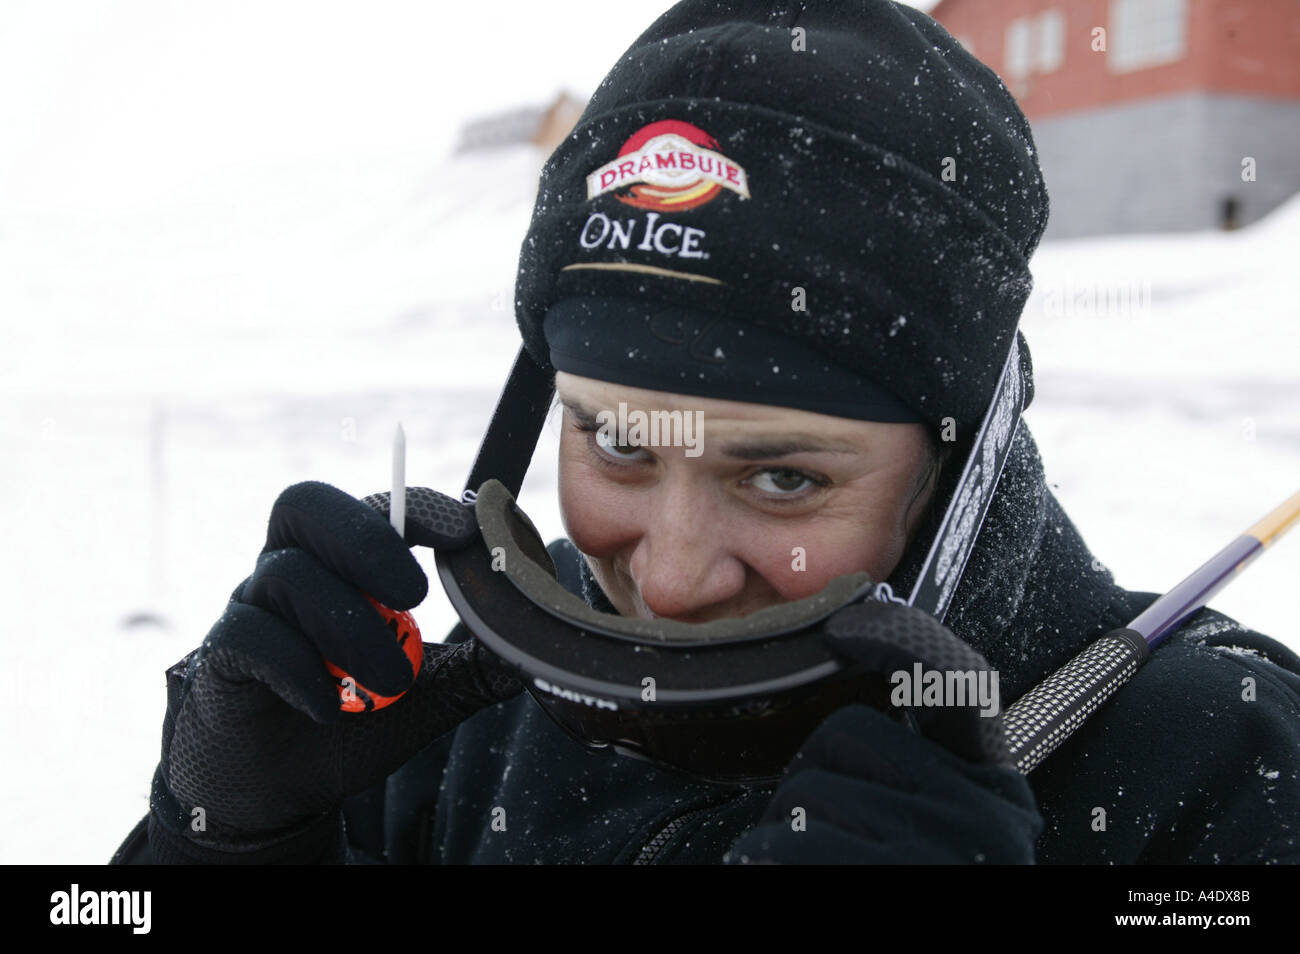 Nicole Materne, female competitor at the 2004 Drambuie ice golf championship in Svalbard, Norway. Stock Photo